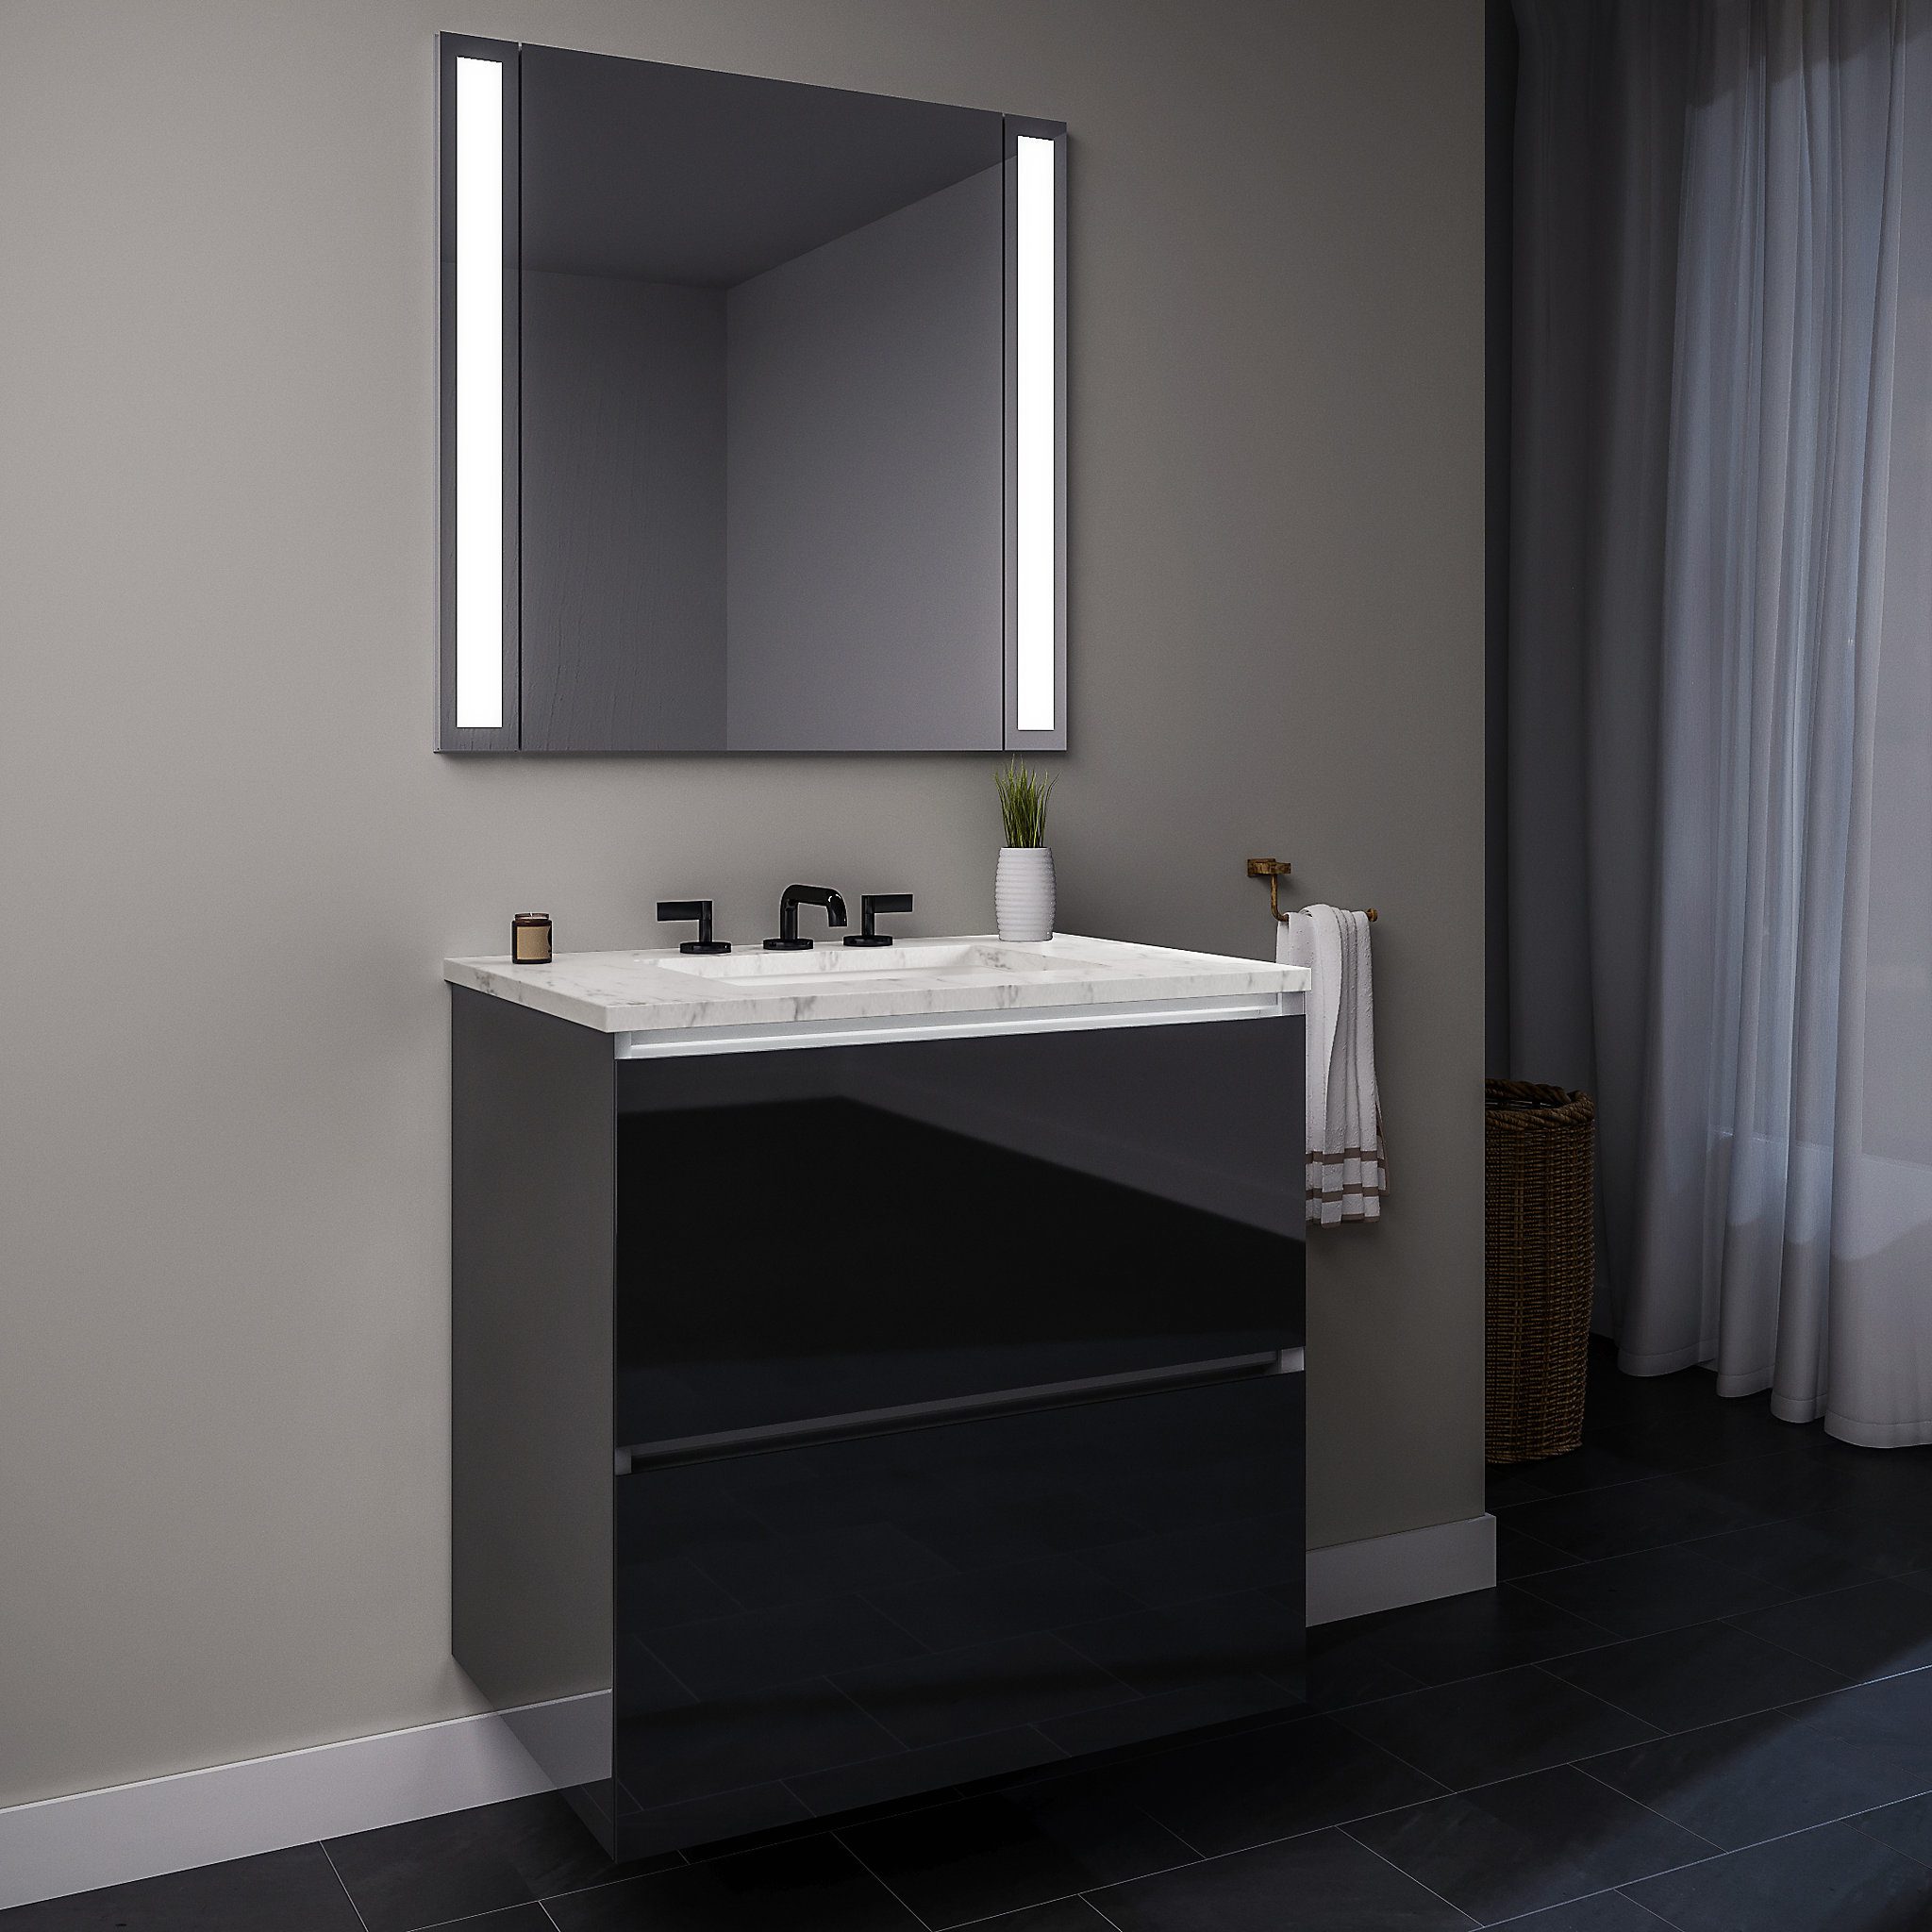 Robern 36119400TB00002 Curated Cartesian Vanity, 36" x 15" x 21", Two Drawer, Tinted Gray Mirror Glass, Plumbing Drawer, Full Dr